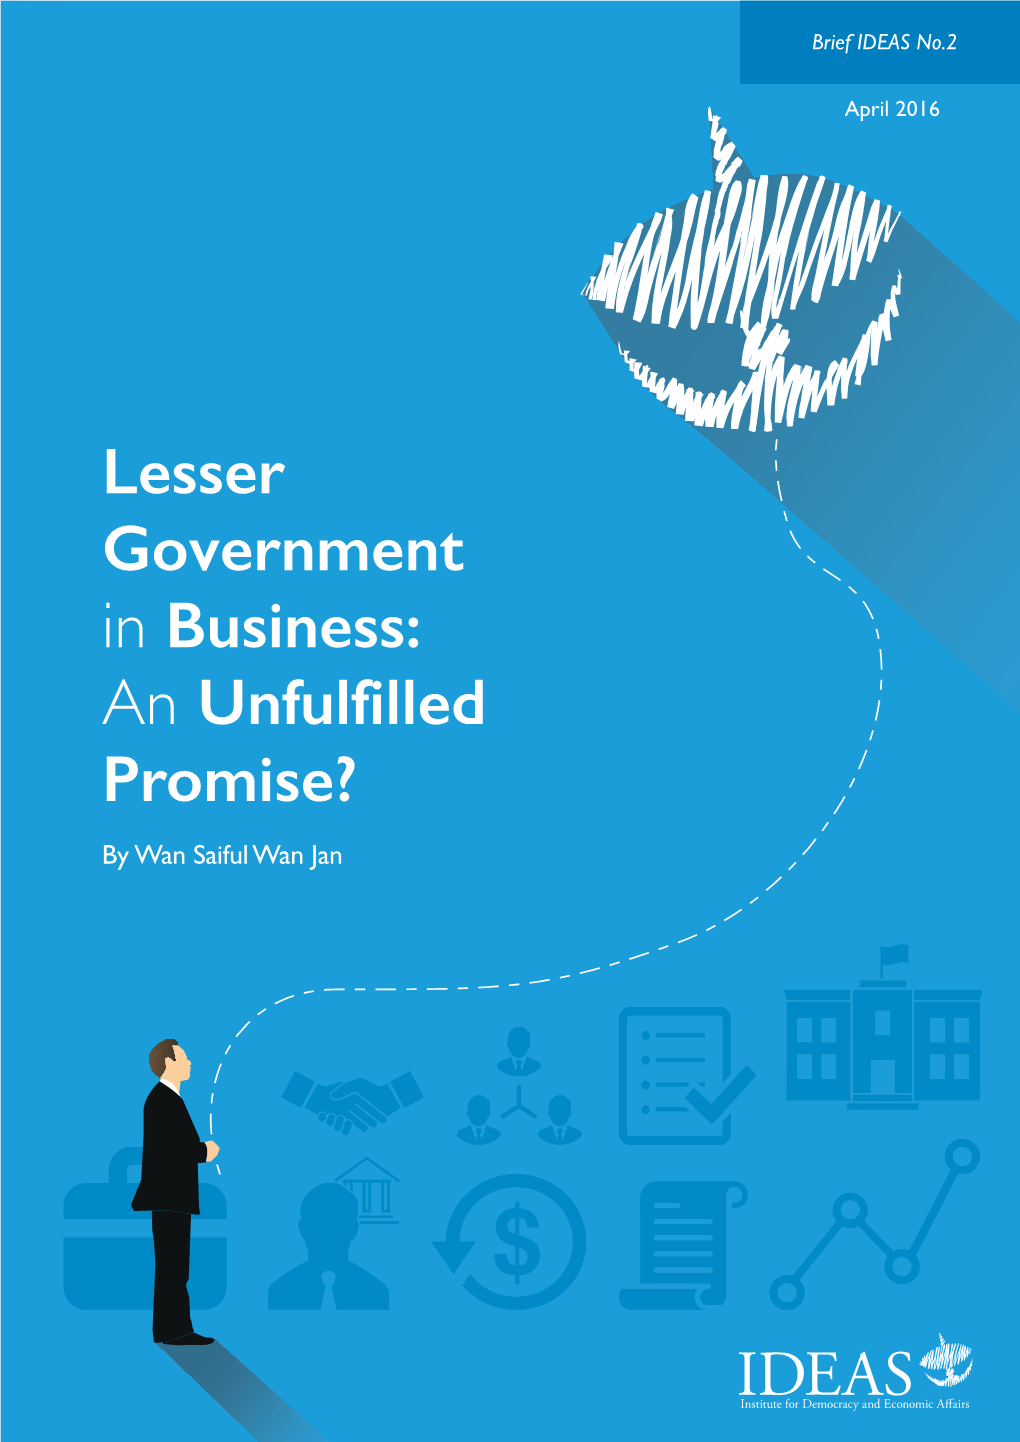 Lesser Government in Business: an Unfulfilled Promise? by Wan Saiful Wan Jan Policy Brief NO